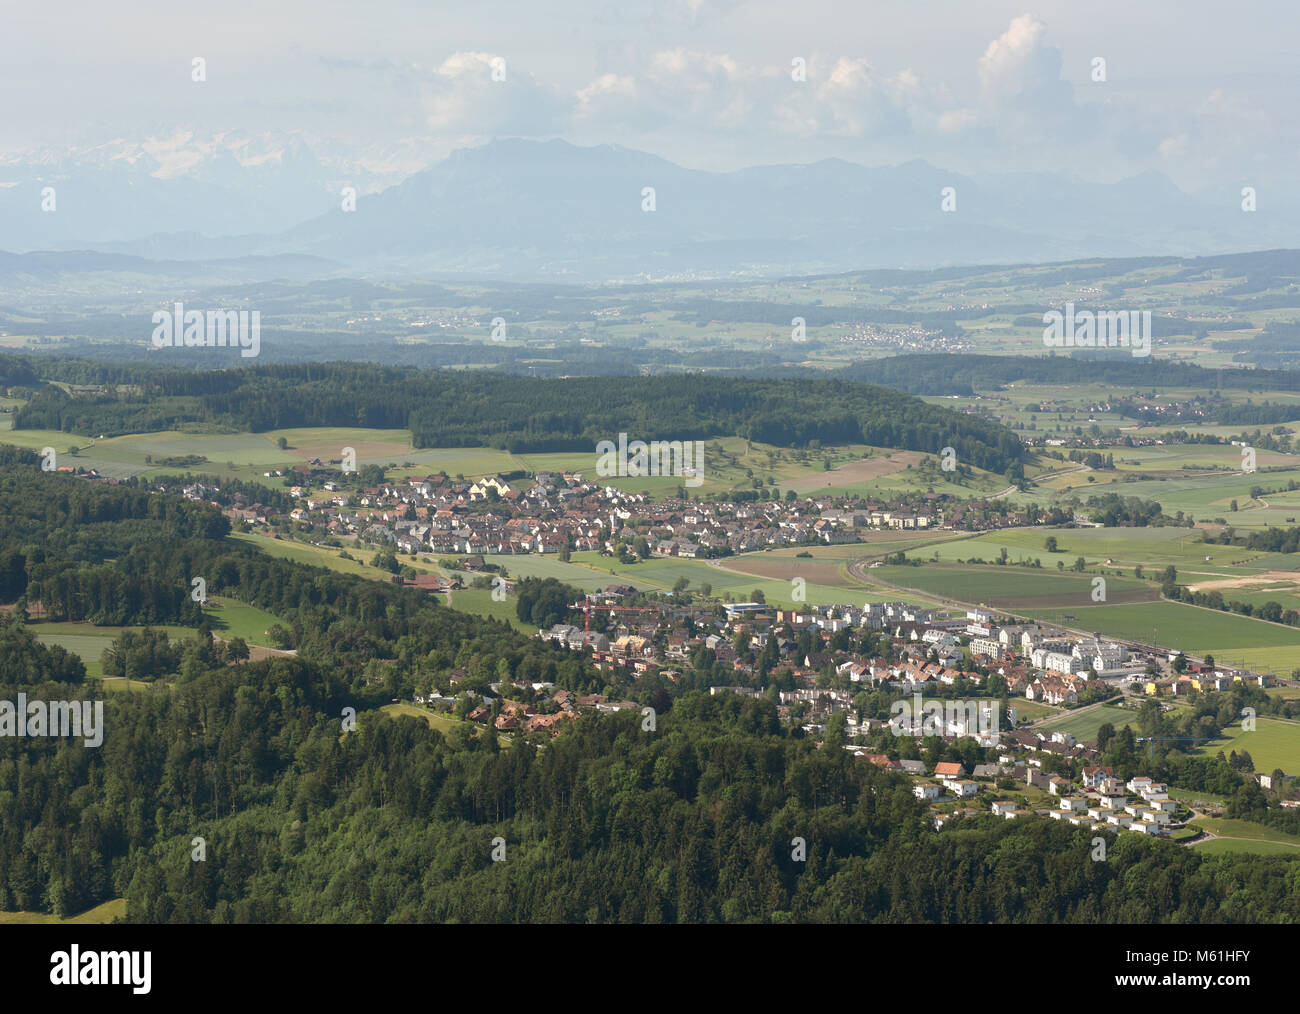 Albis Switzerland High Resolution Stock Photography and Images - Alamy